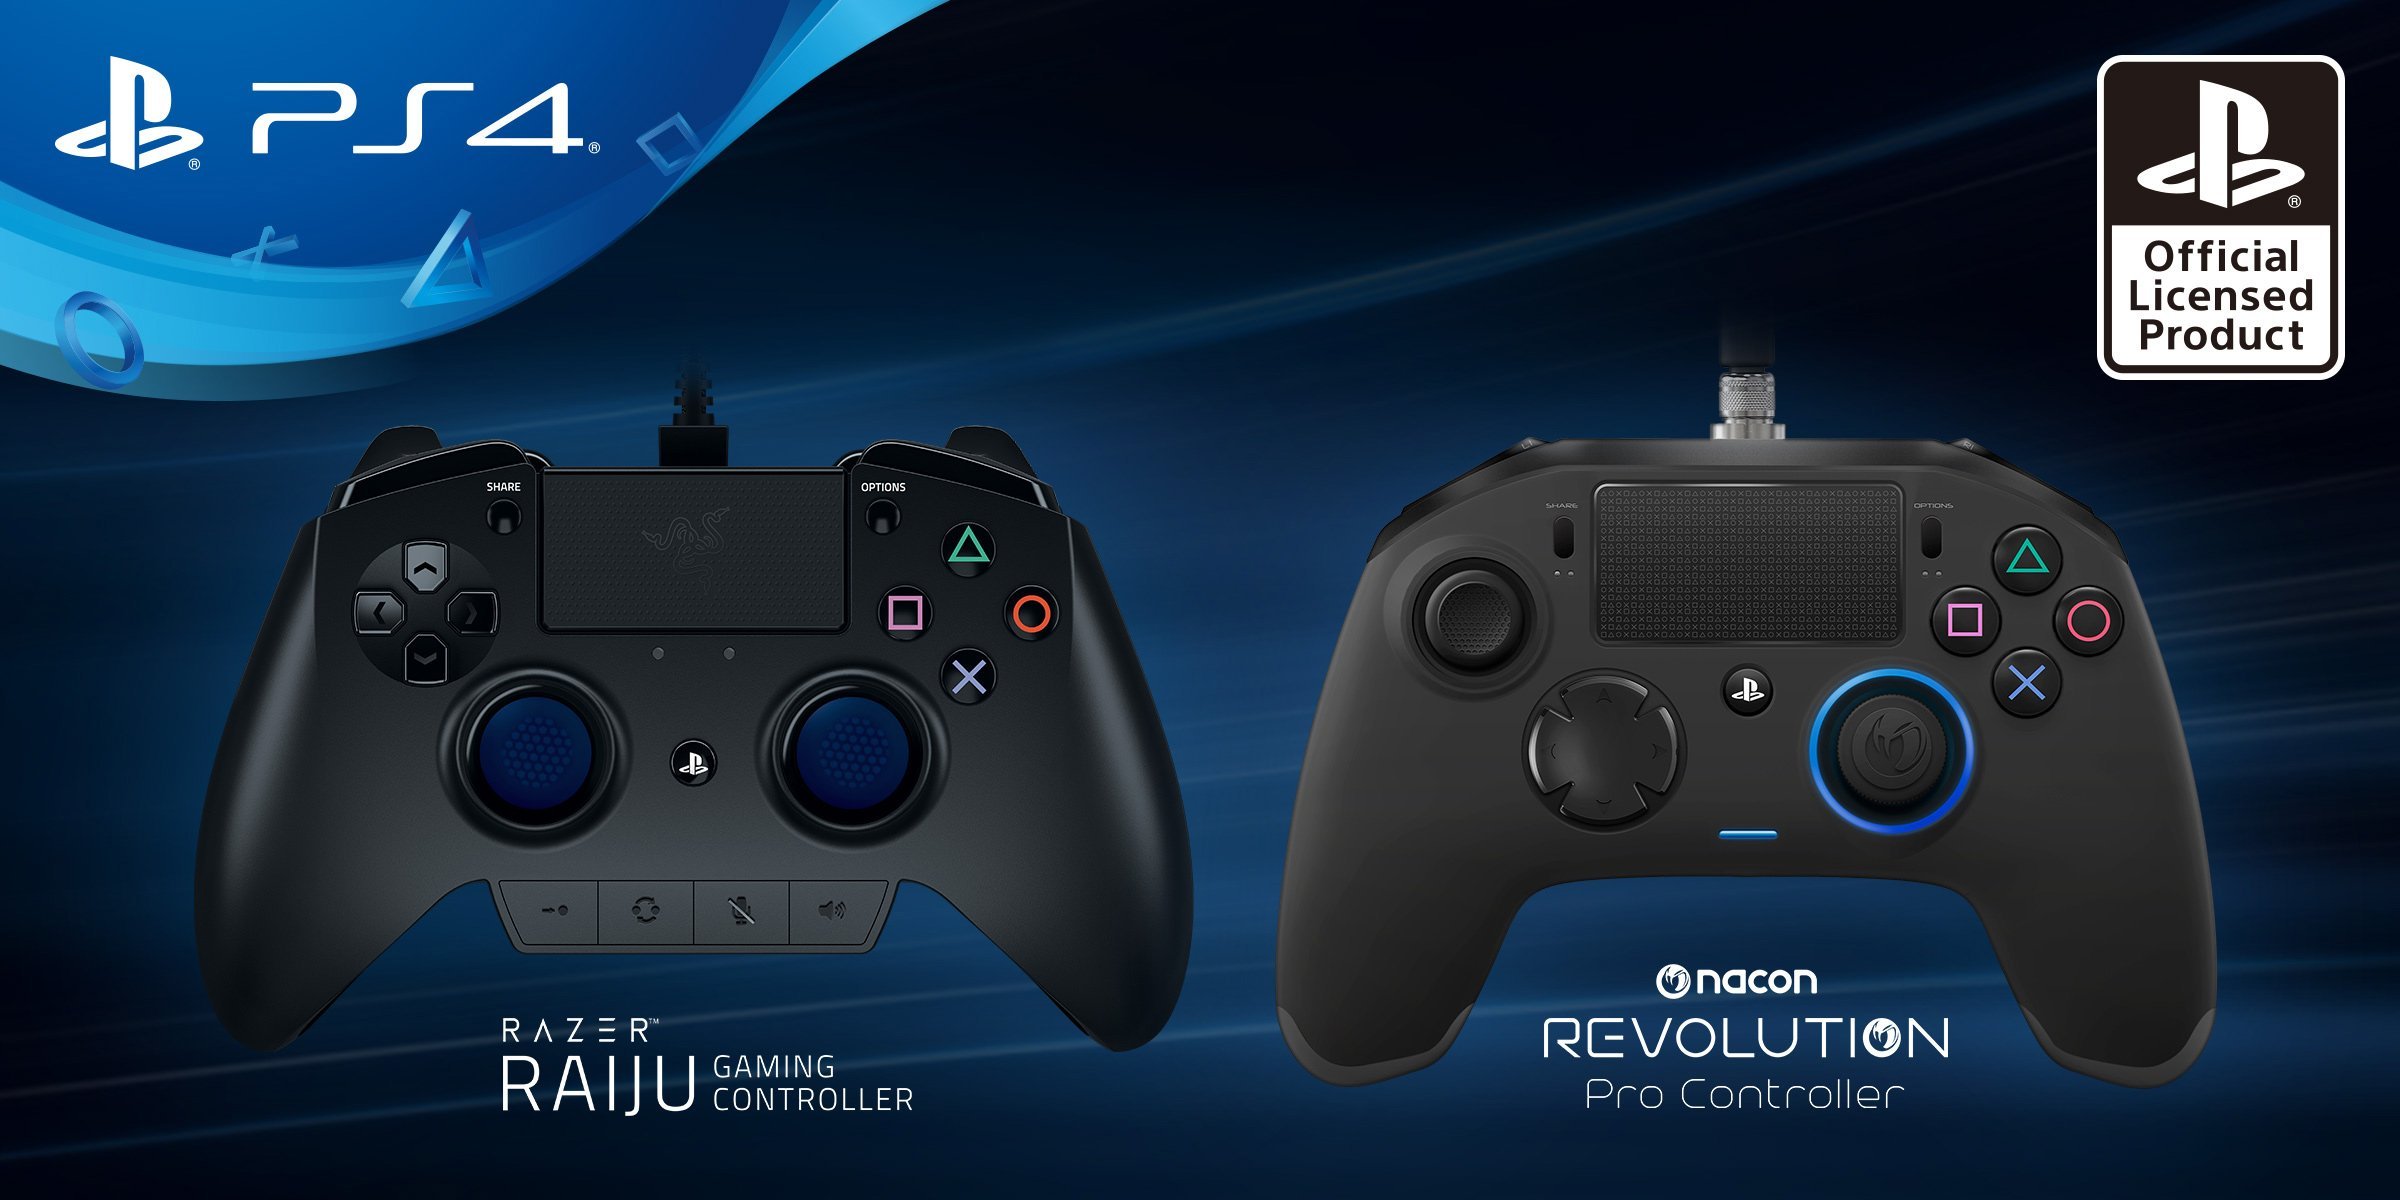 Hardware Review: Nacon Revolution Pro Controller 3 for PS4 - An Easy  Recommendation If You're New to Nacon